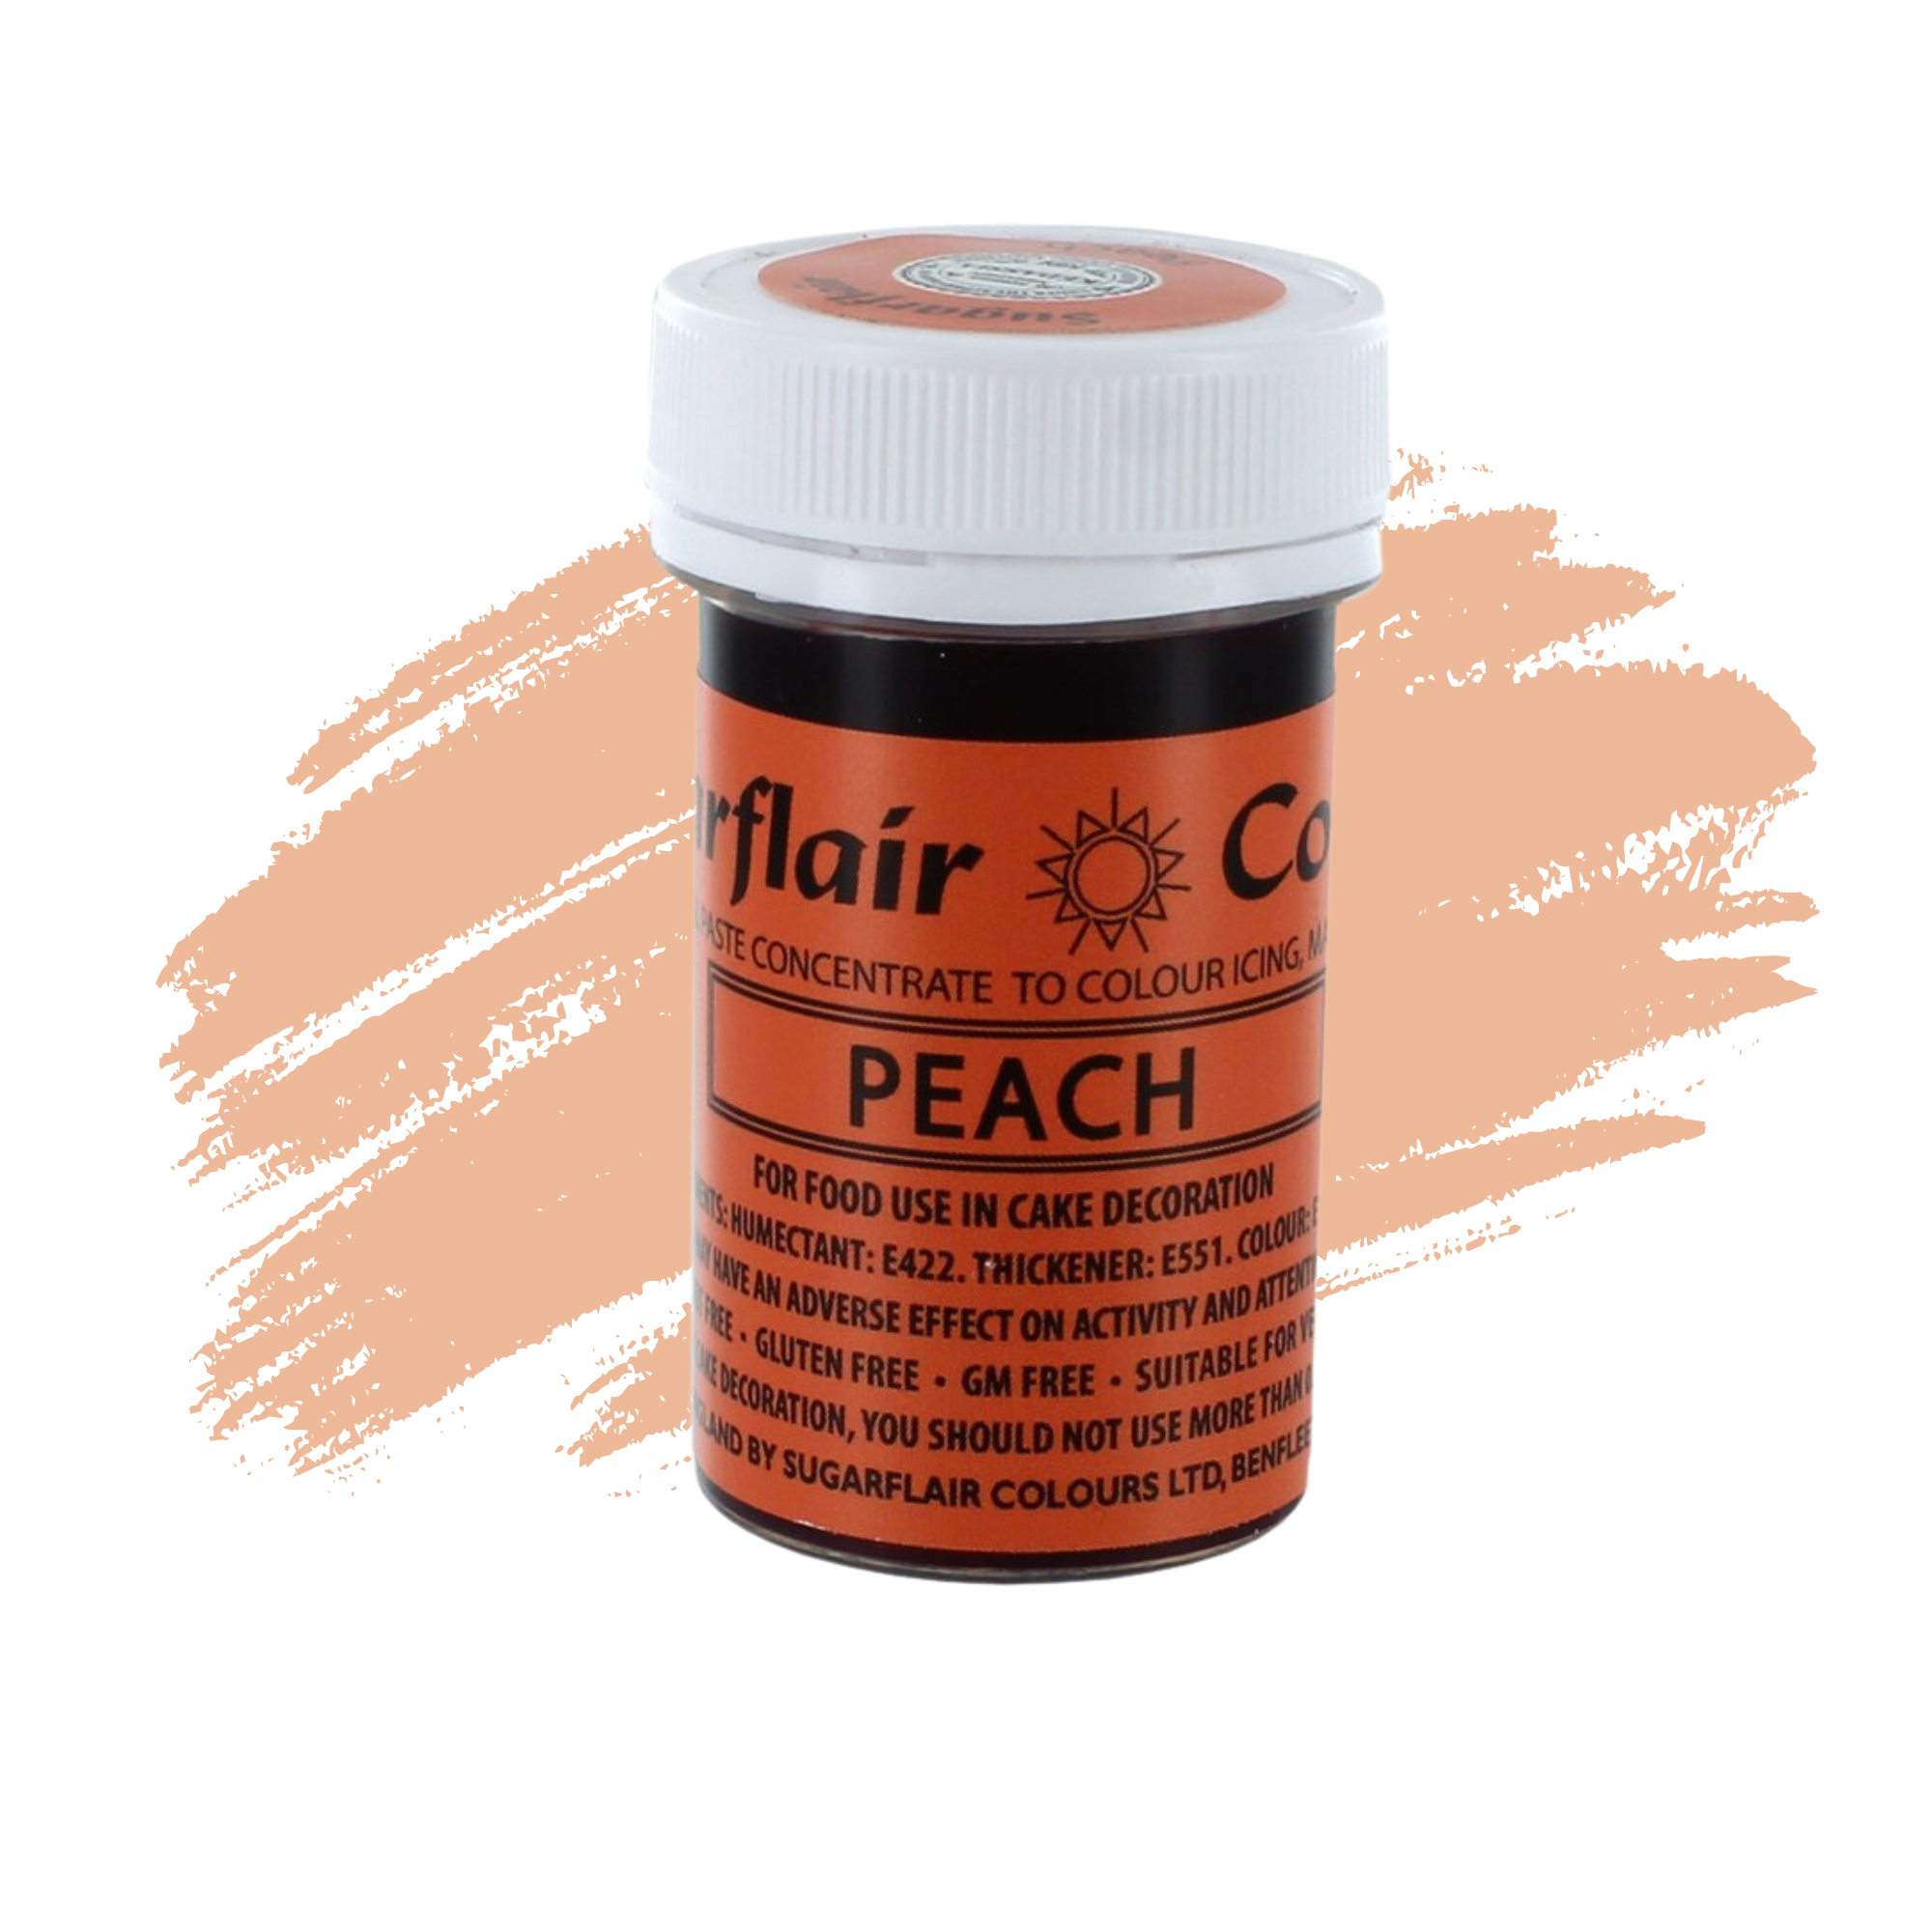 Sugarflair Paste Colours Concentrated Food Colouring - Spectral Peach - 25g